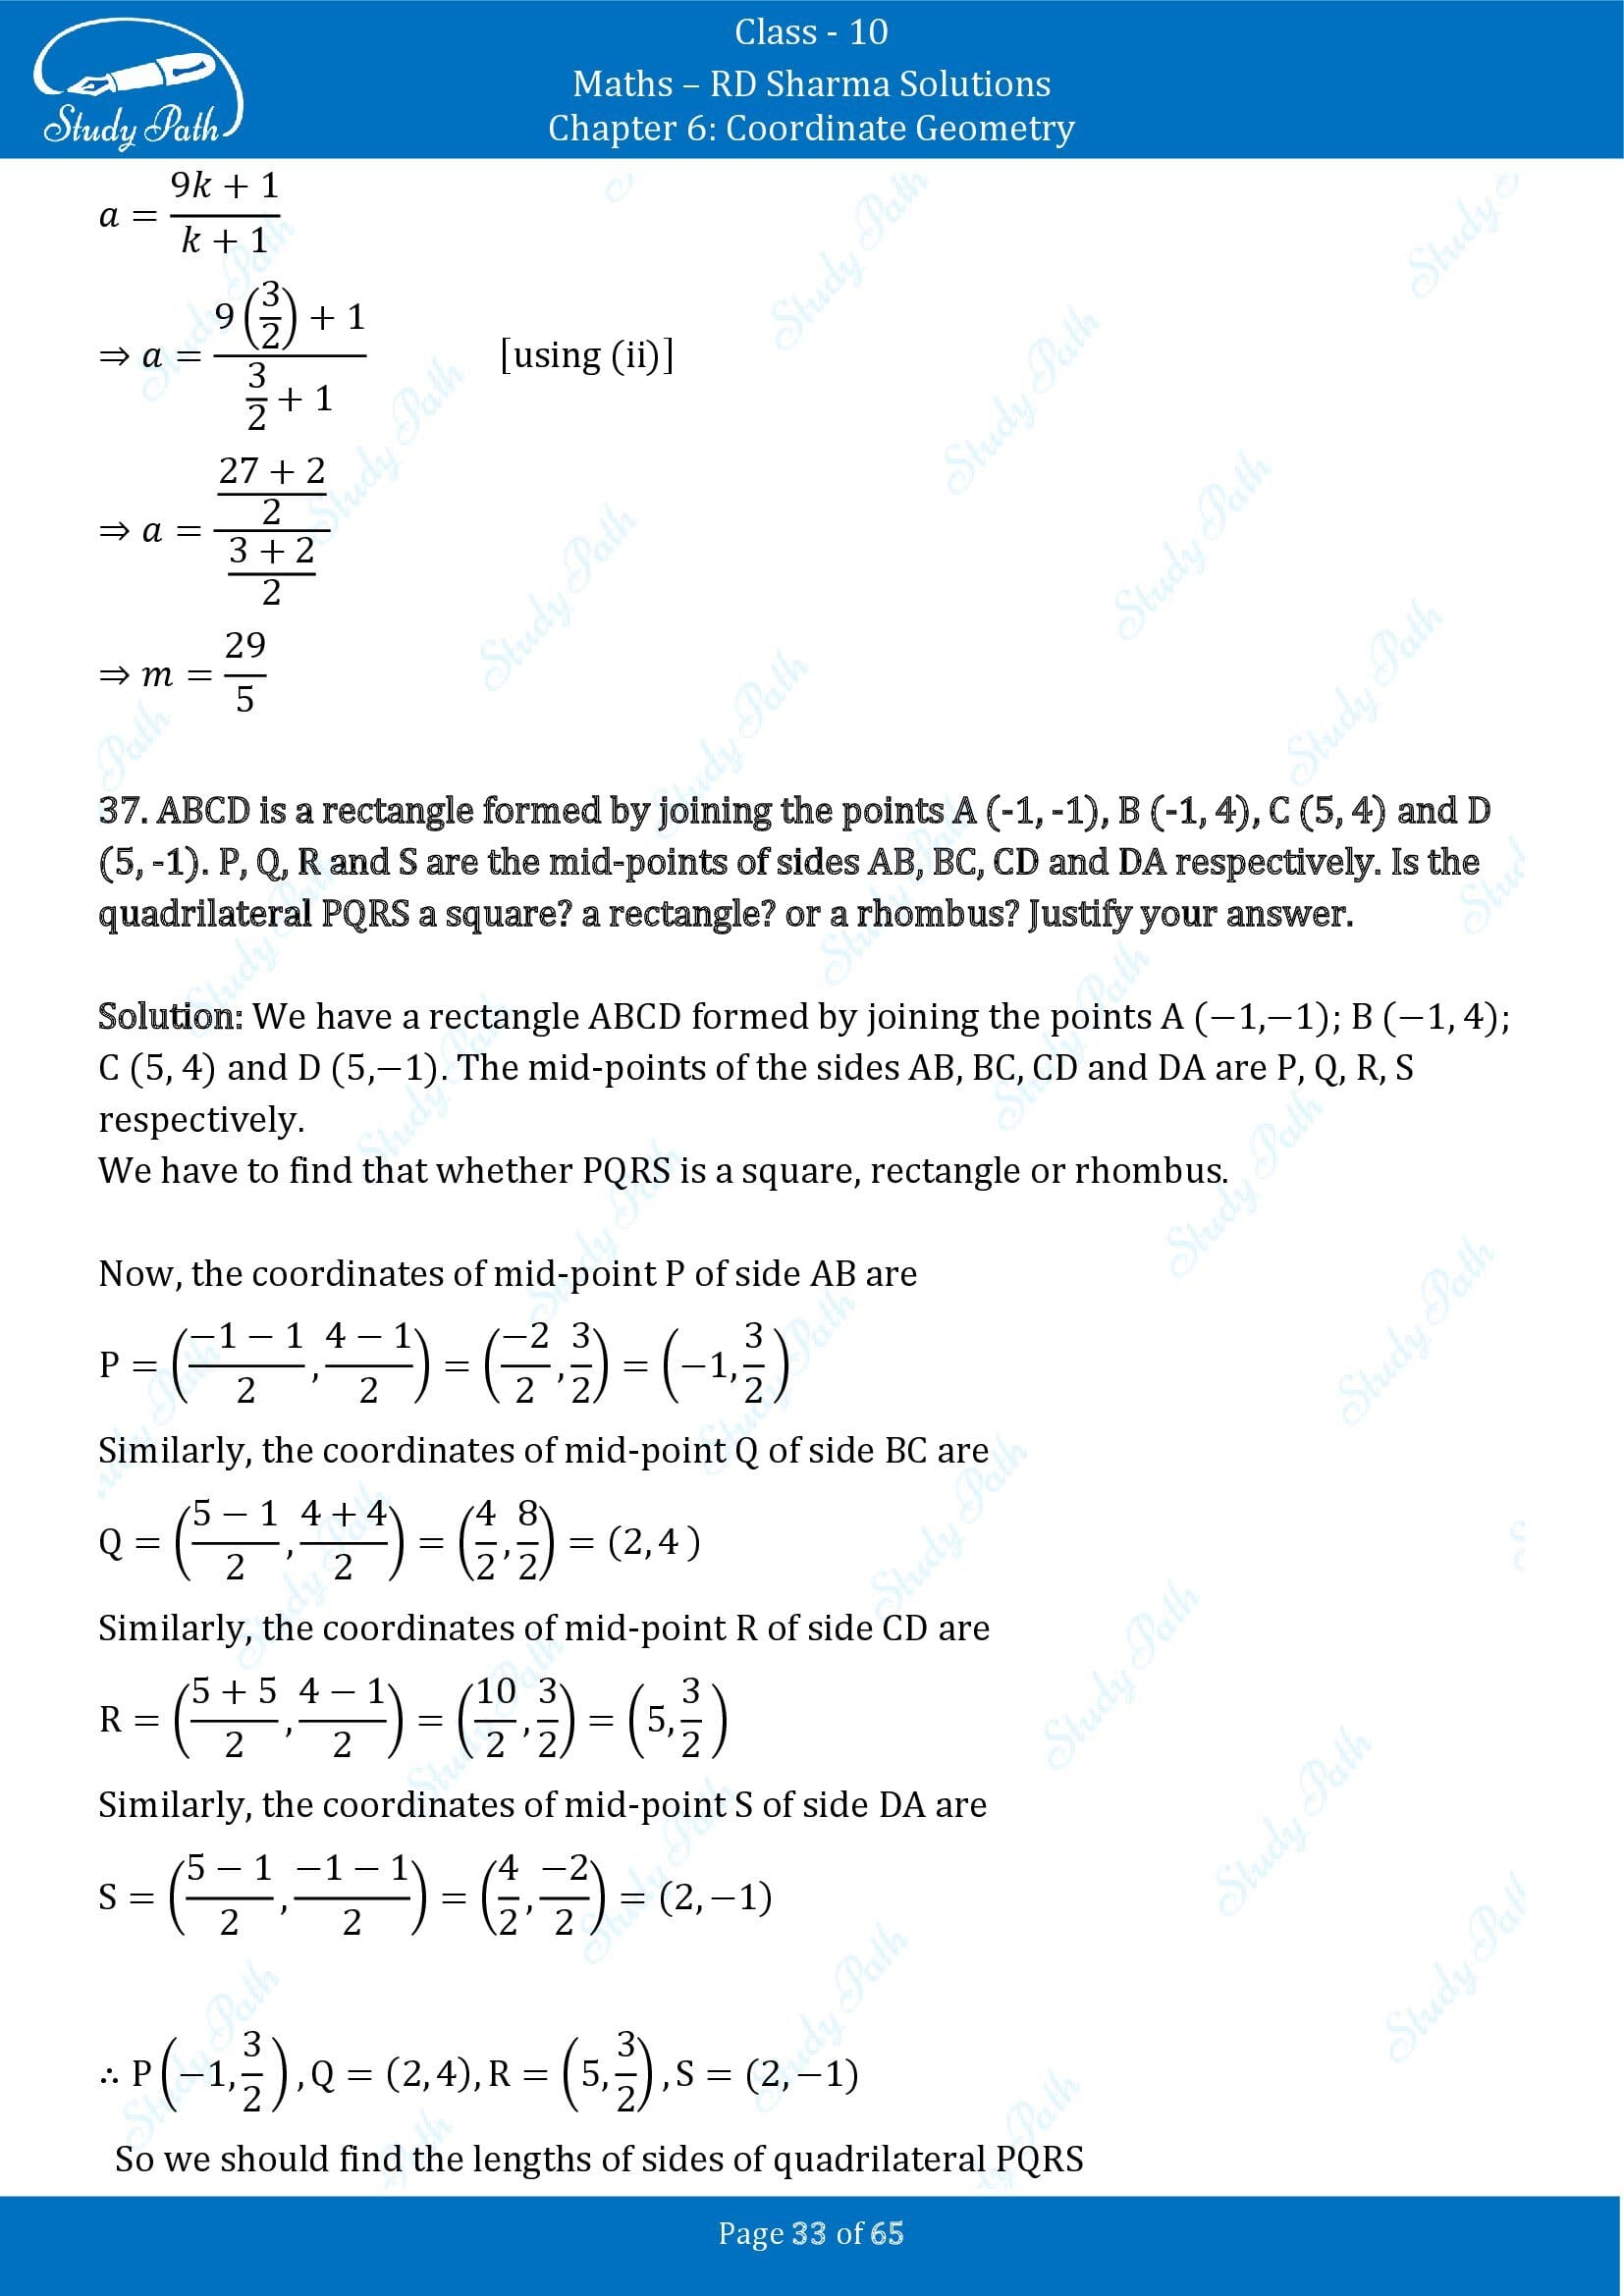 RD Sharma Solutions Class 10 Chapter 6 Coordinate Geometry Exercise 6.3 00033